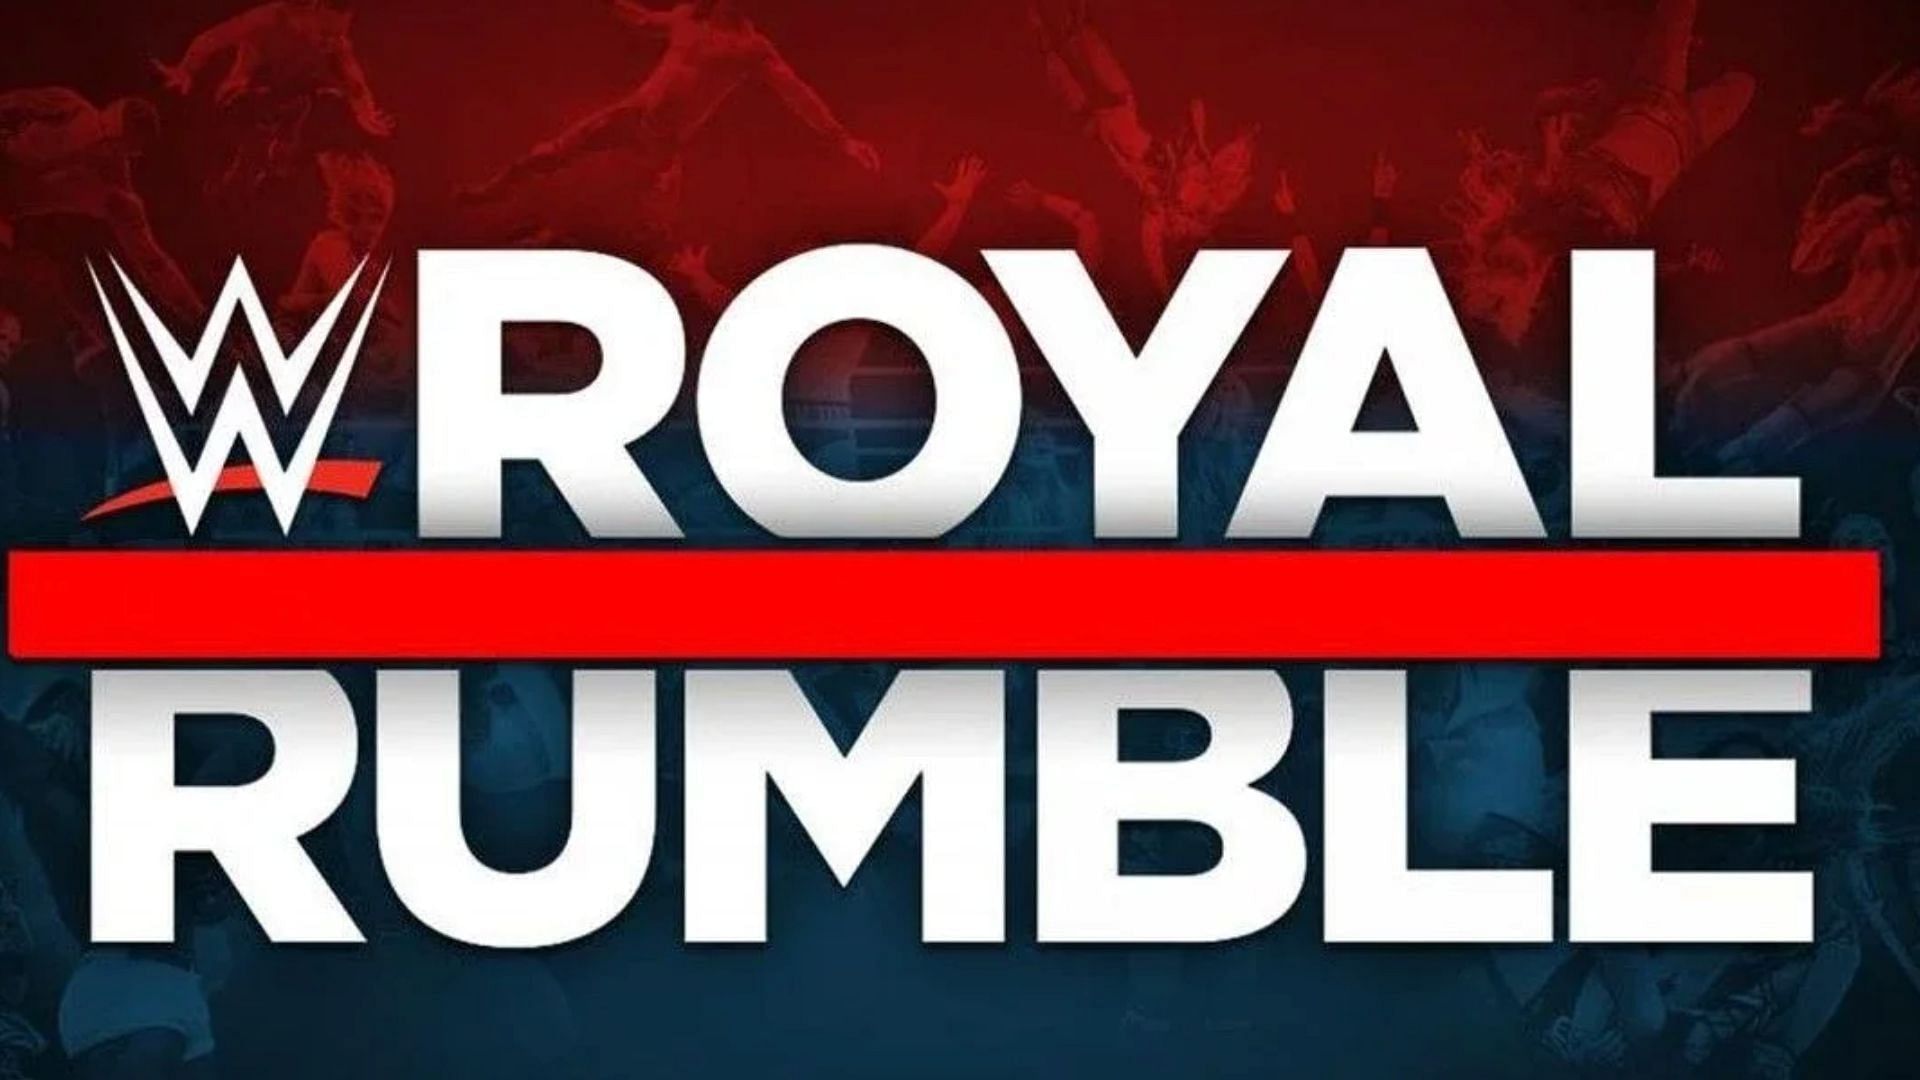 WWE Royal Rumble ticket sales on pace to break record - Reports